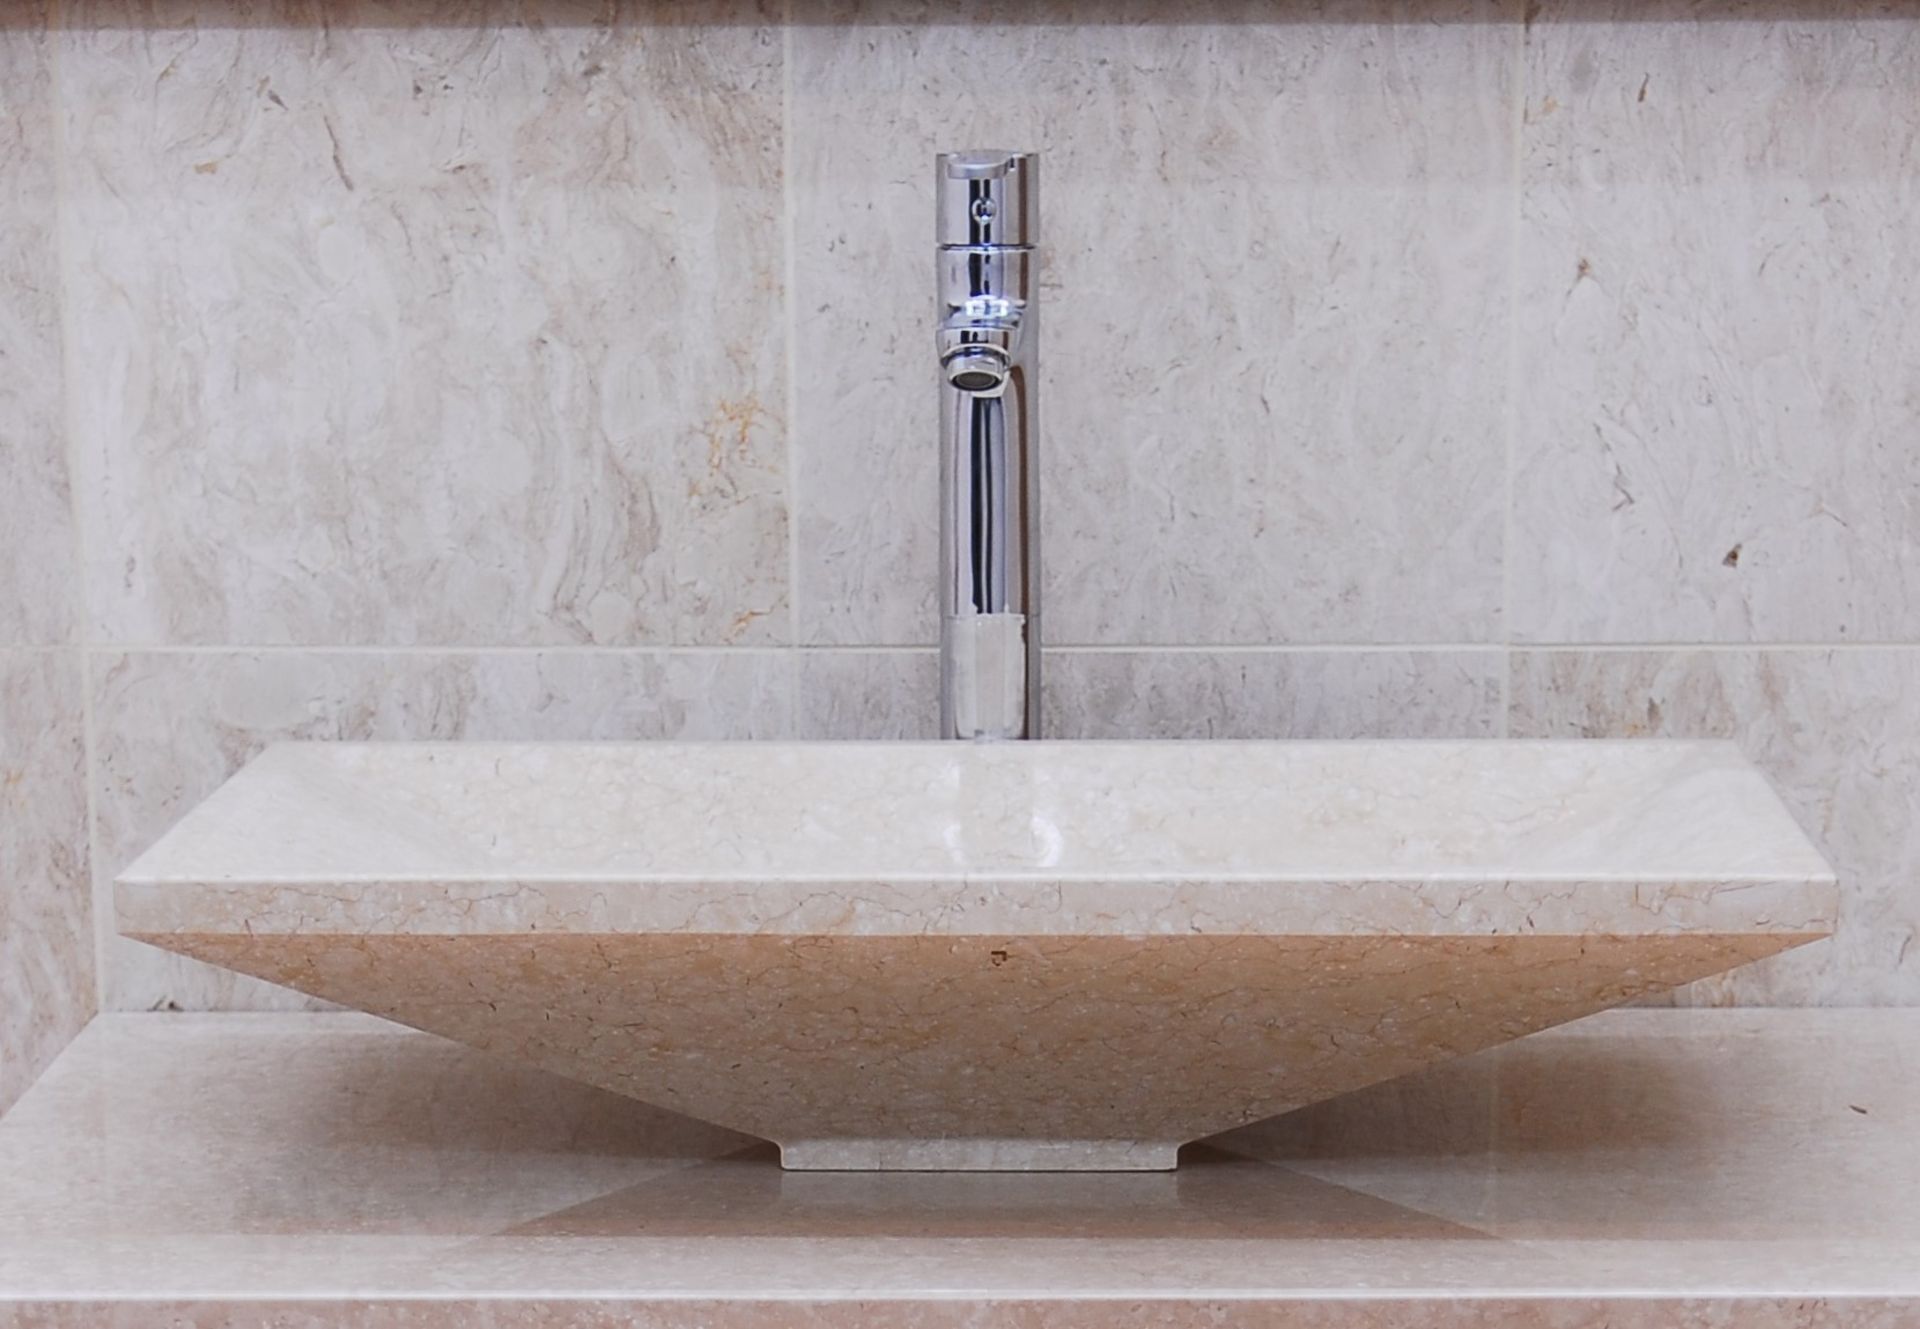 1 x Stonearth 'Karo' Solid Travertine Stone Countertop Sink Basin - New Boxed Stock - RRP £525 -